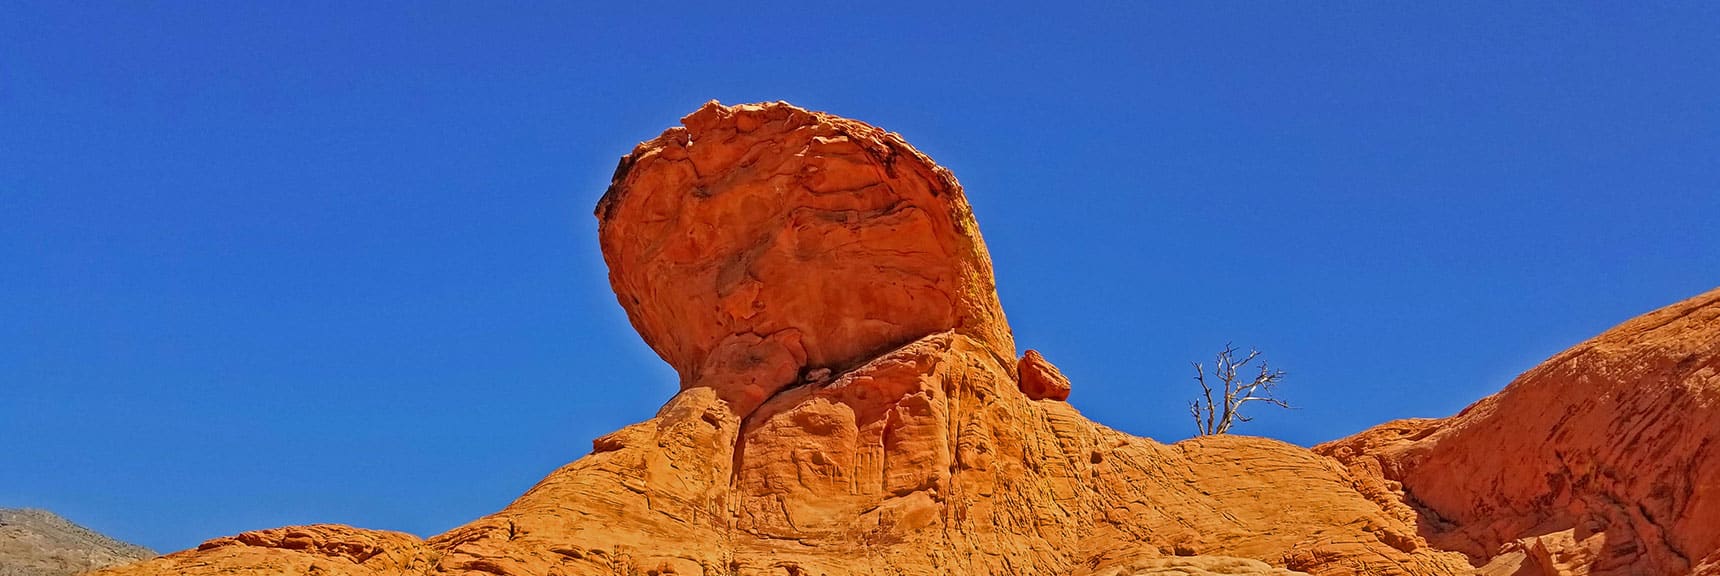 Amazing Towering Overhang Formation | Little Red Rock Las Vegas, Nevada, Near La Madre Mountains Wilderness